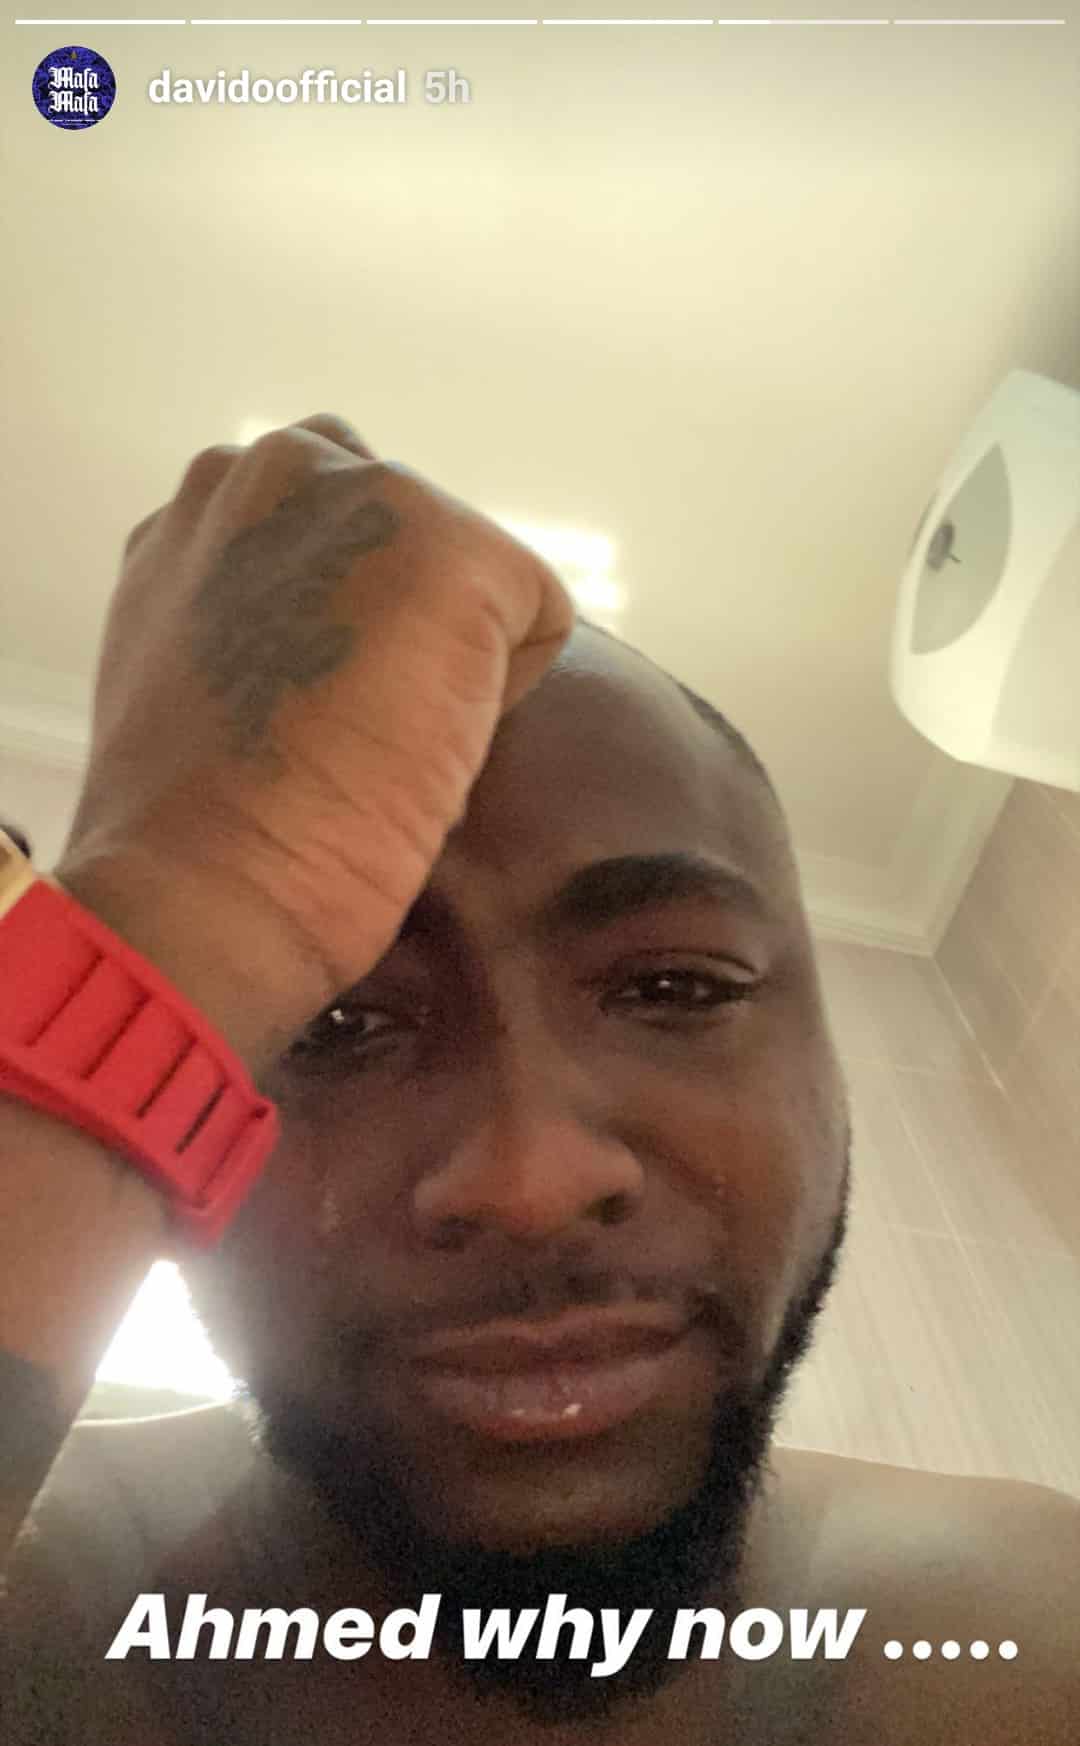 Davido in tears as he loses his close friend to death (video)